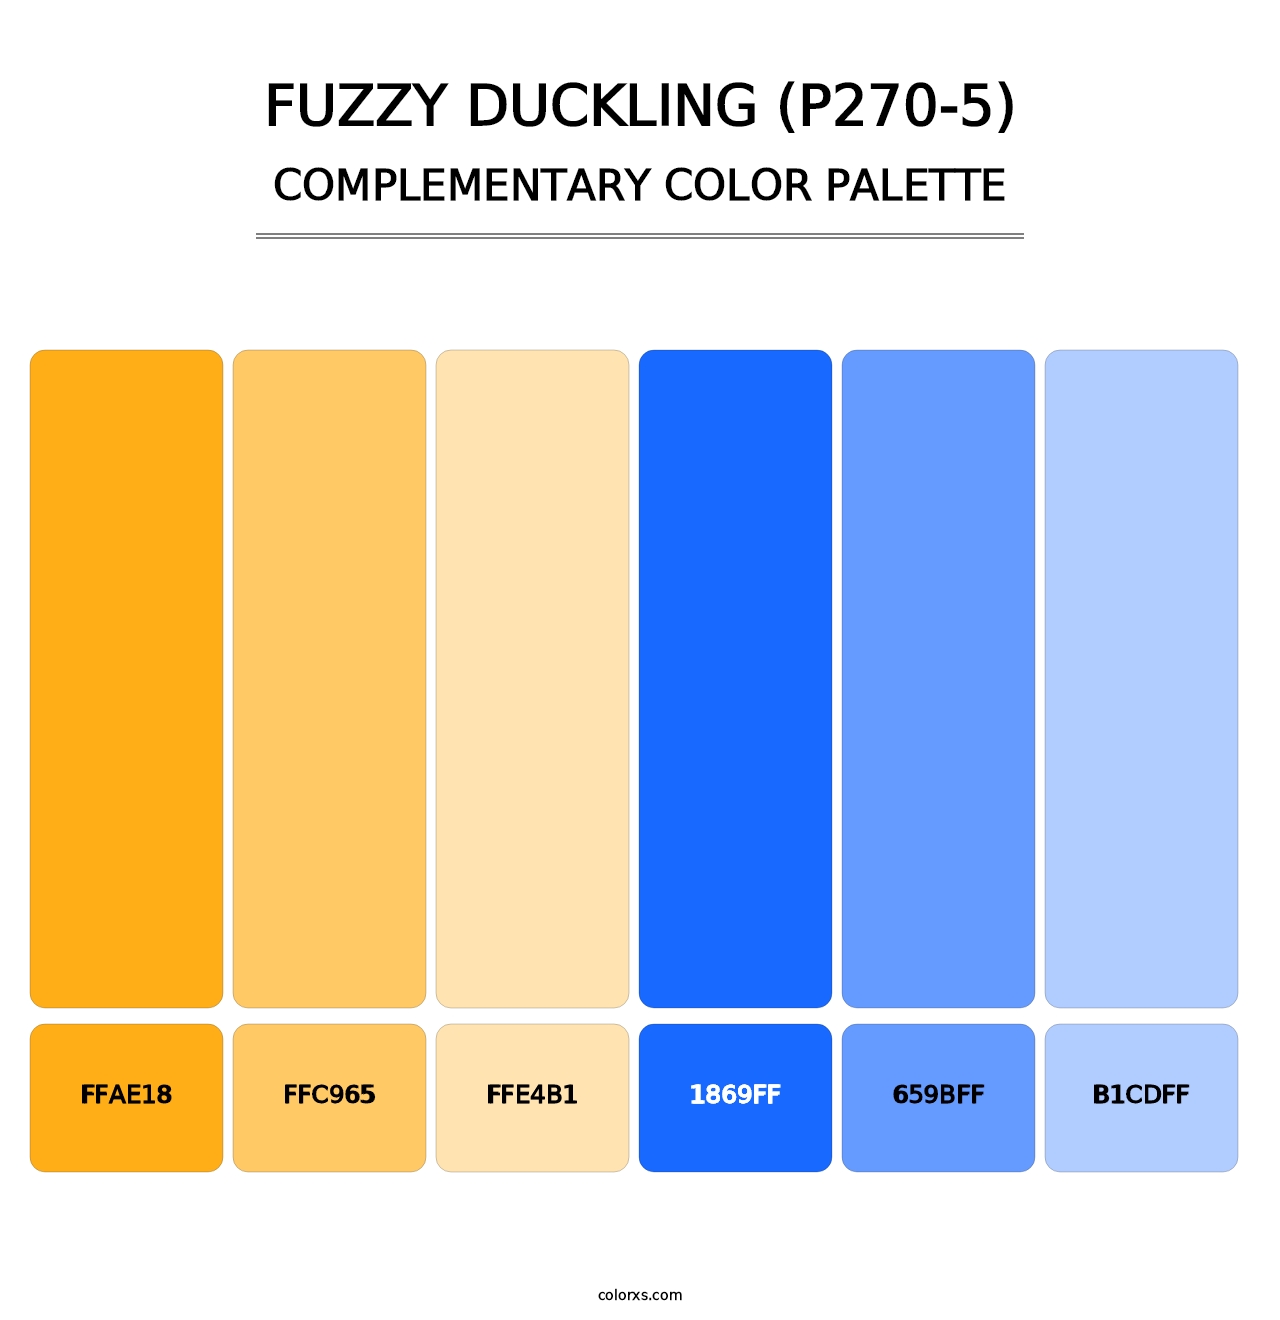 Fuzzy Duckling (P270-5) - Complementary Color Palette